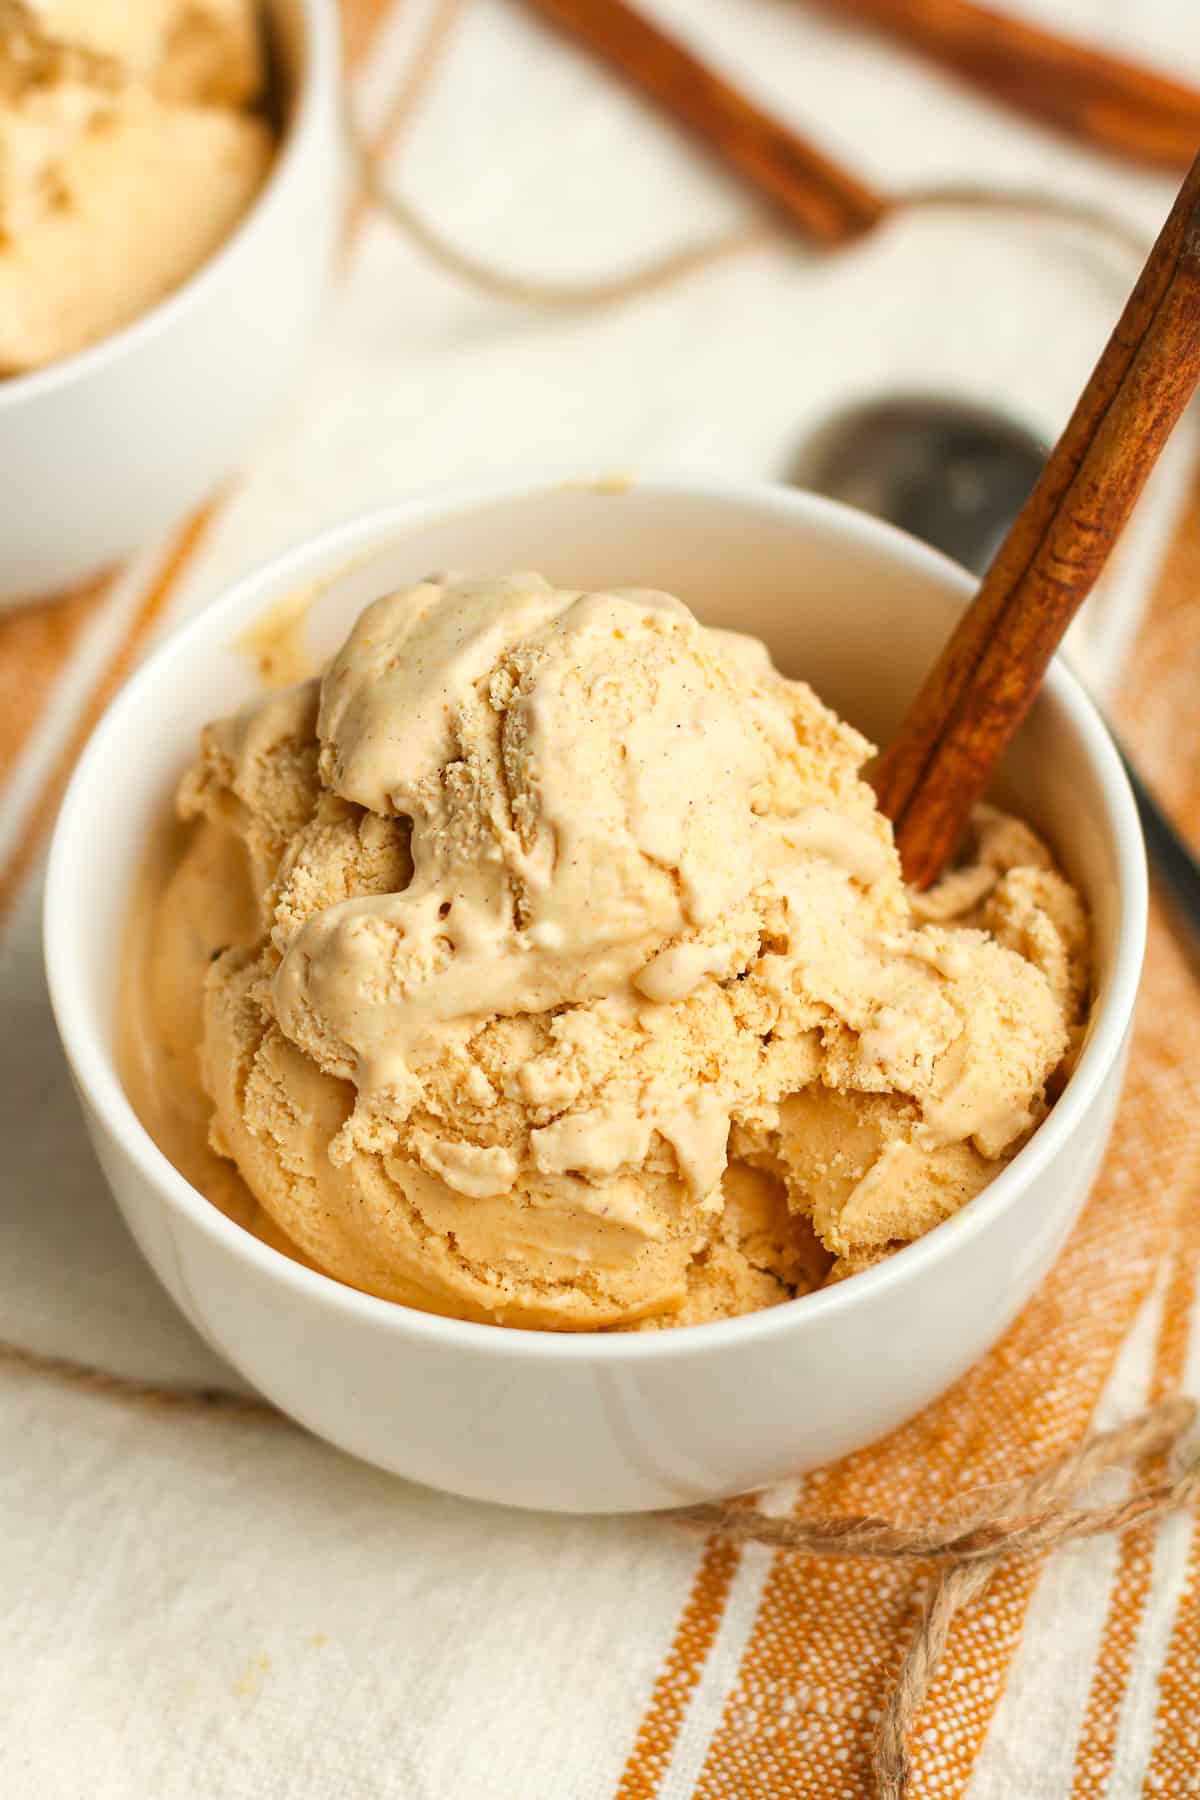 Side shot of a bowl of pumpkin ice cream with a cinnamon stick.